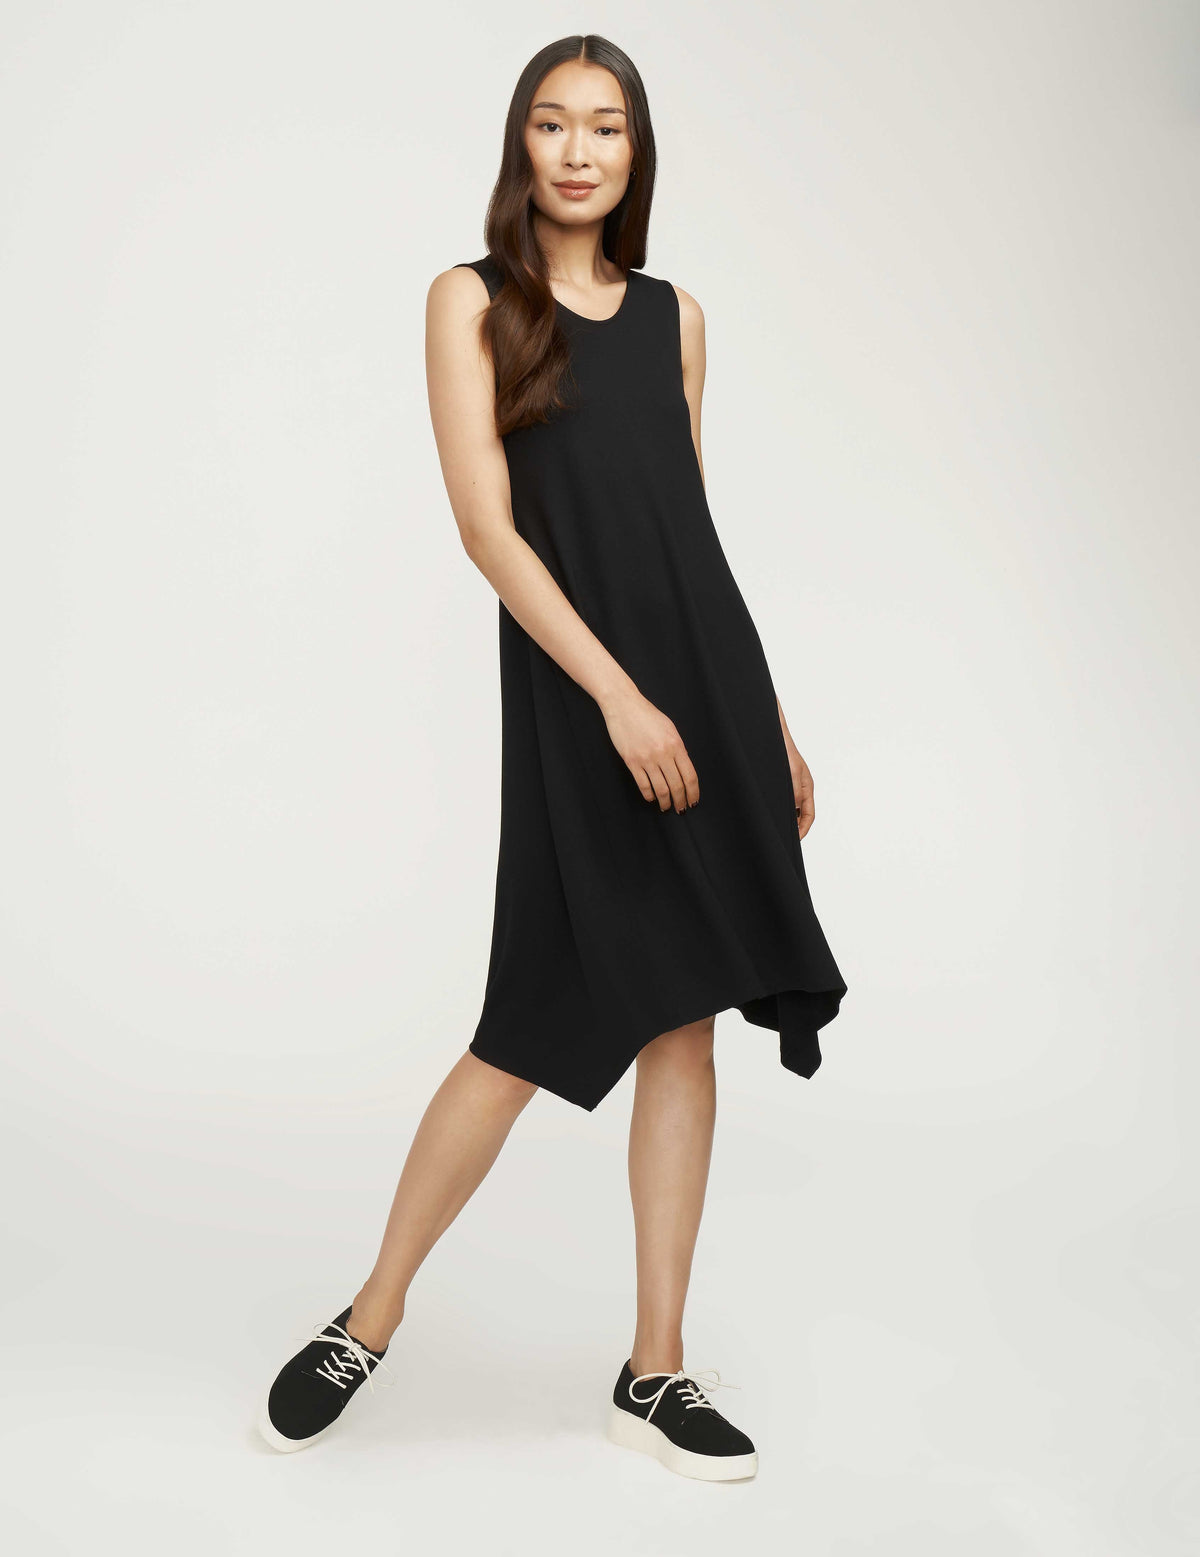 Anne Klein  Serenity Knit Gusset Dress- Clearance